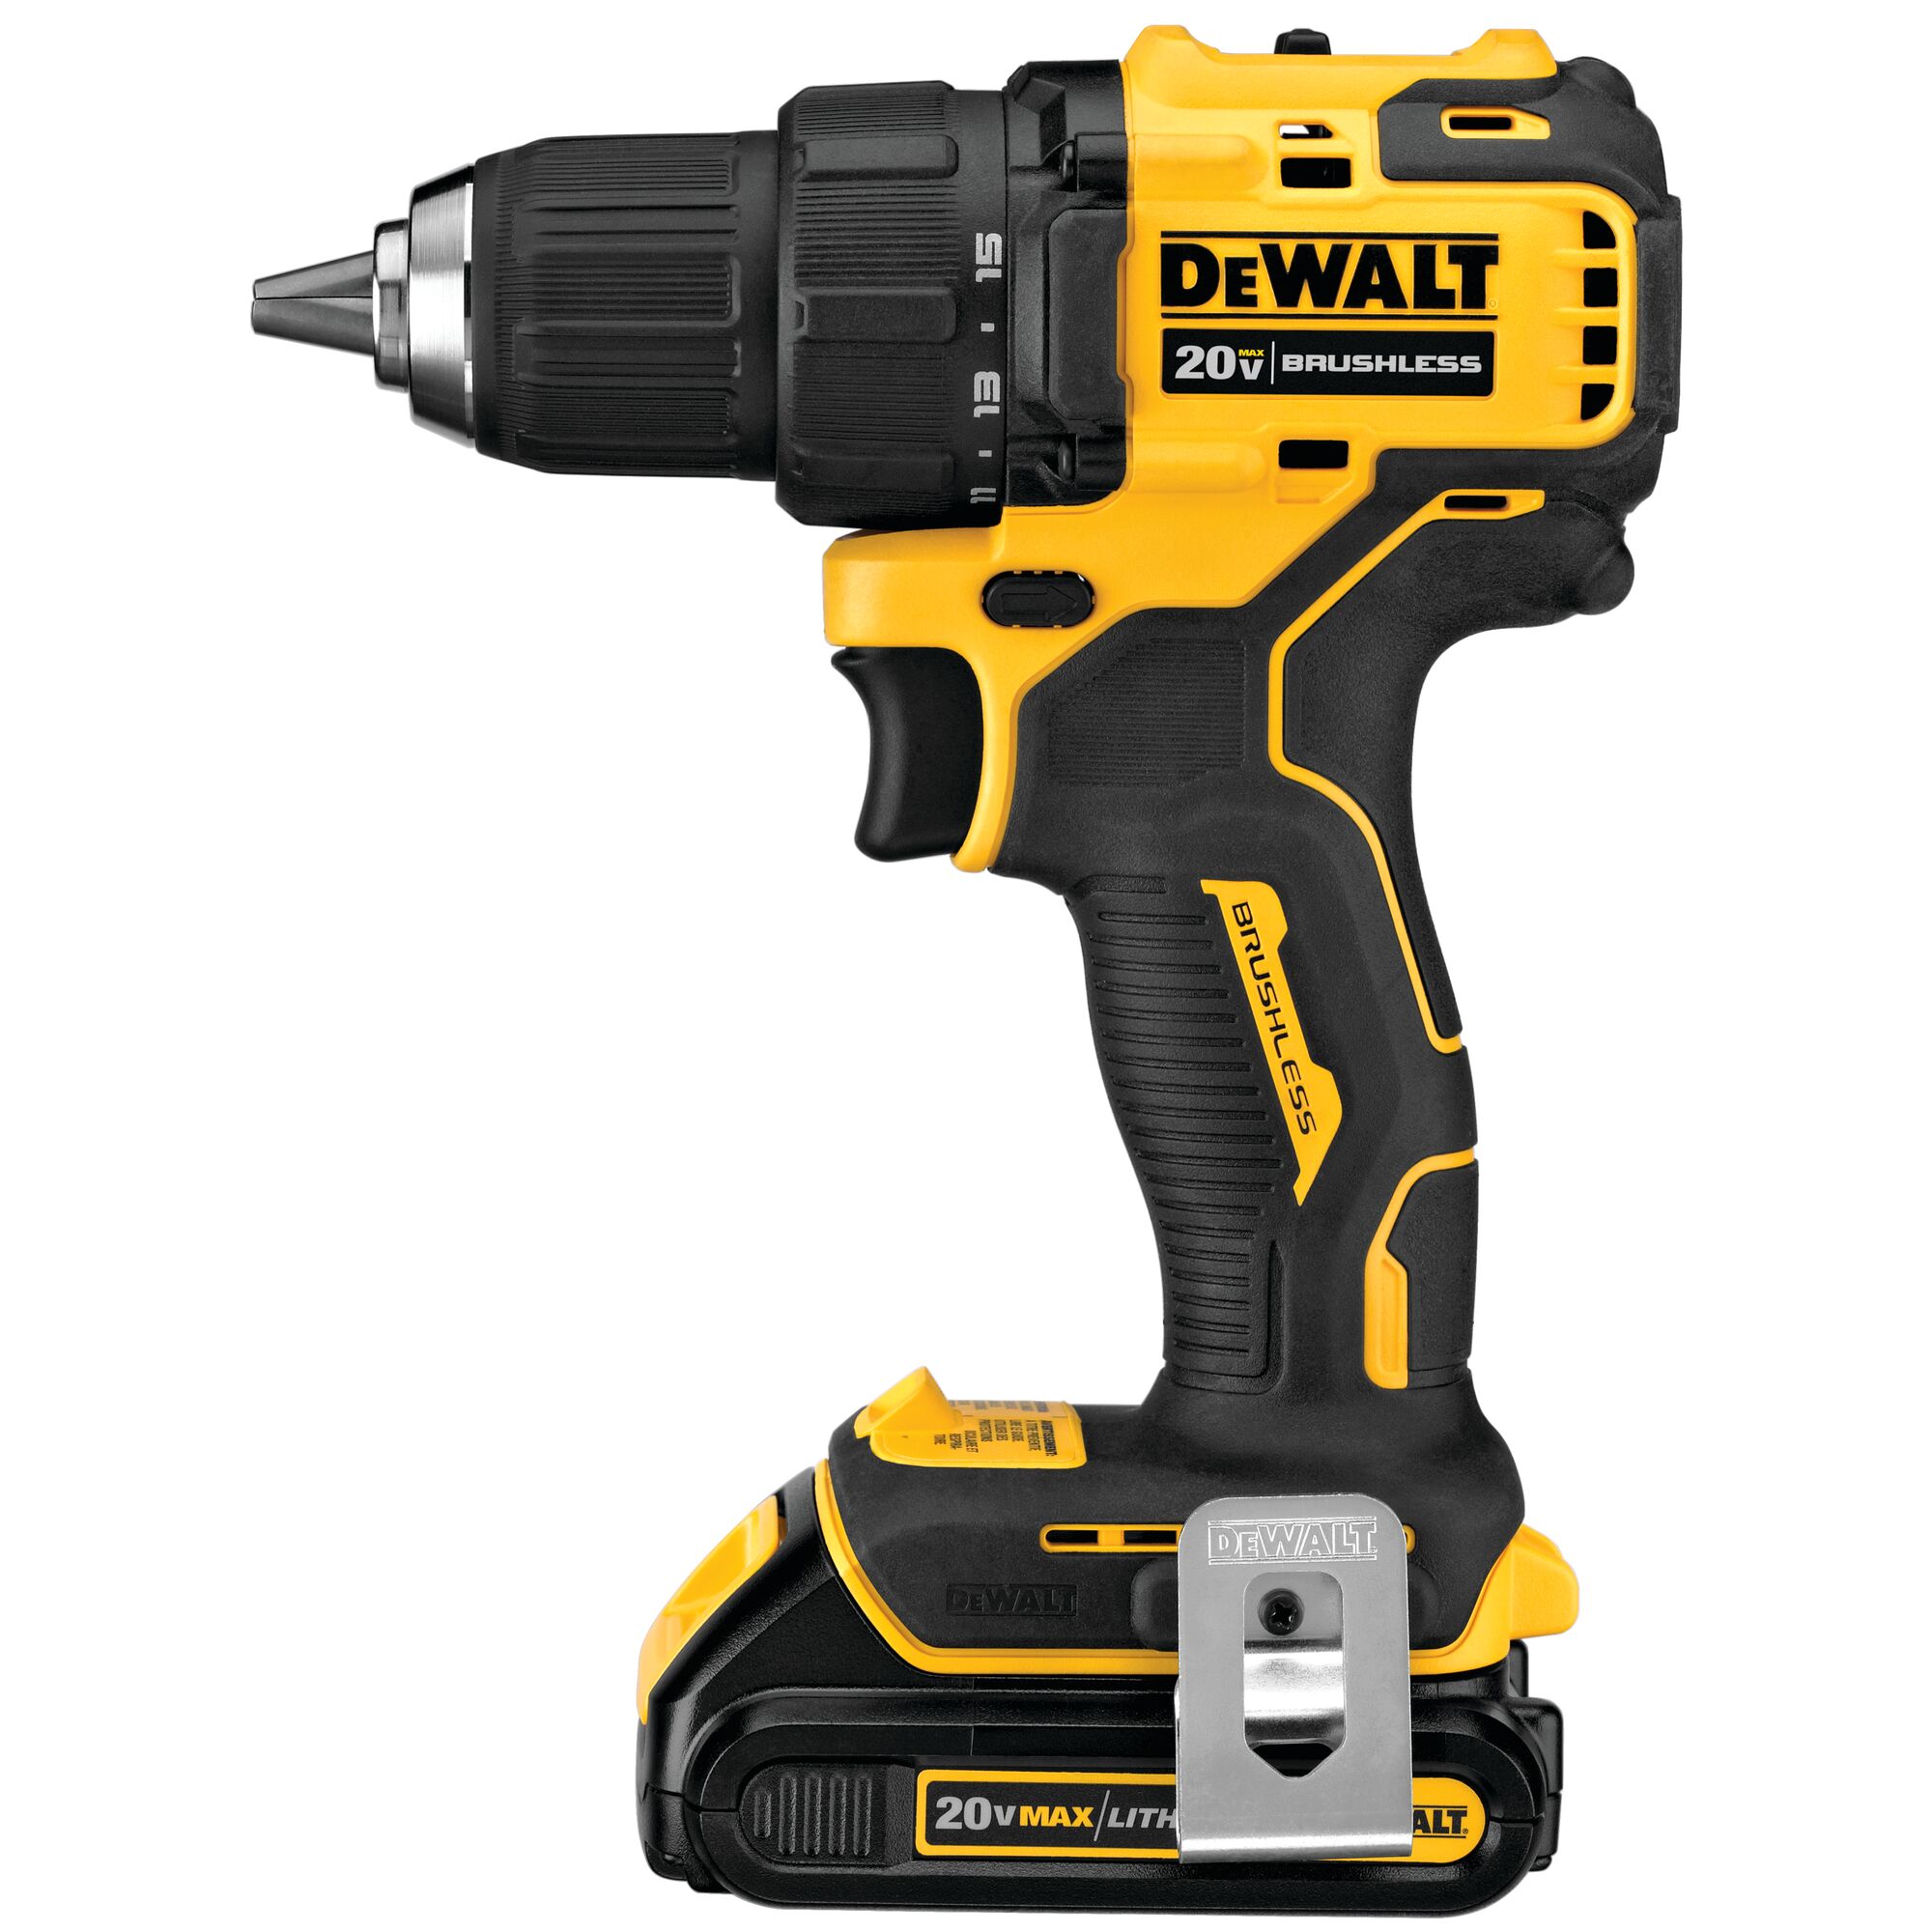 ATOMIC™ 20V MAX* Brushless Compact 1/2 in. Drill/Driver Kit | DEWALT